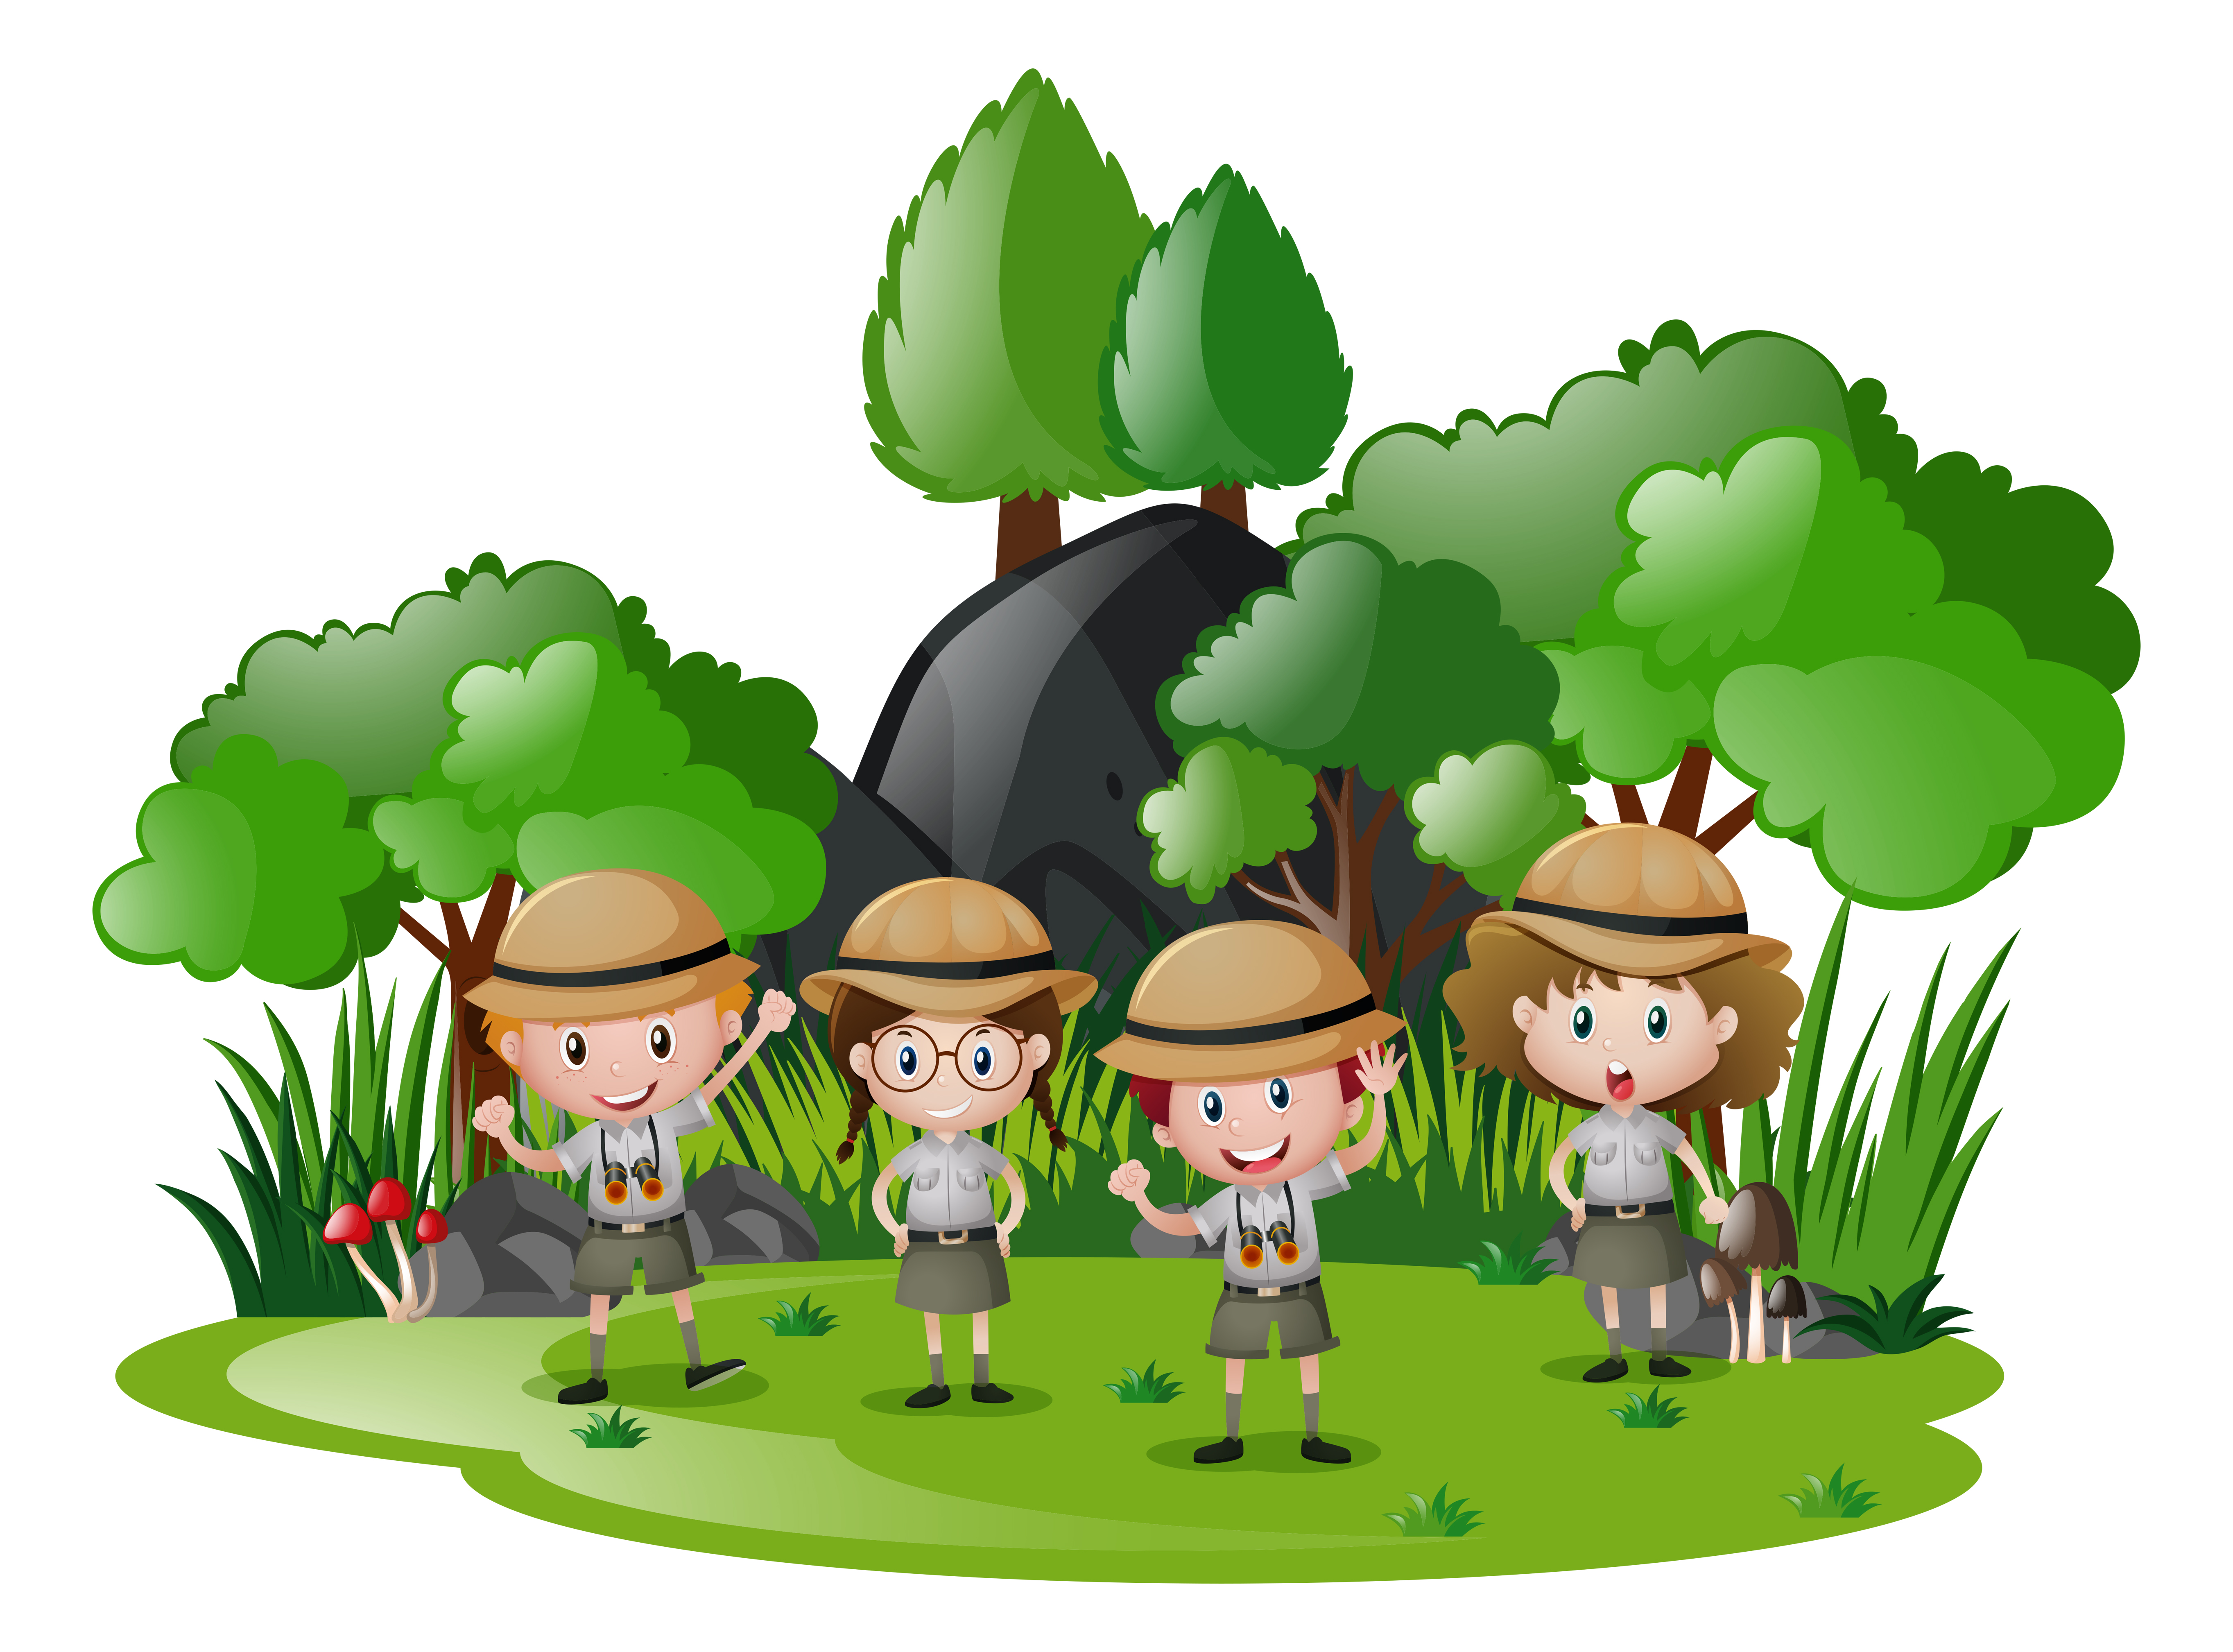 Four Kids In Safari Outfit Having Fun In The Forest Download Free Vectors Clipart Graphics Vector Art